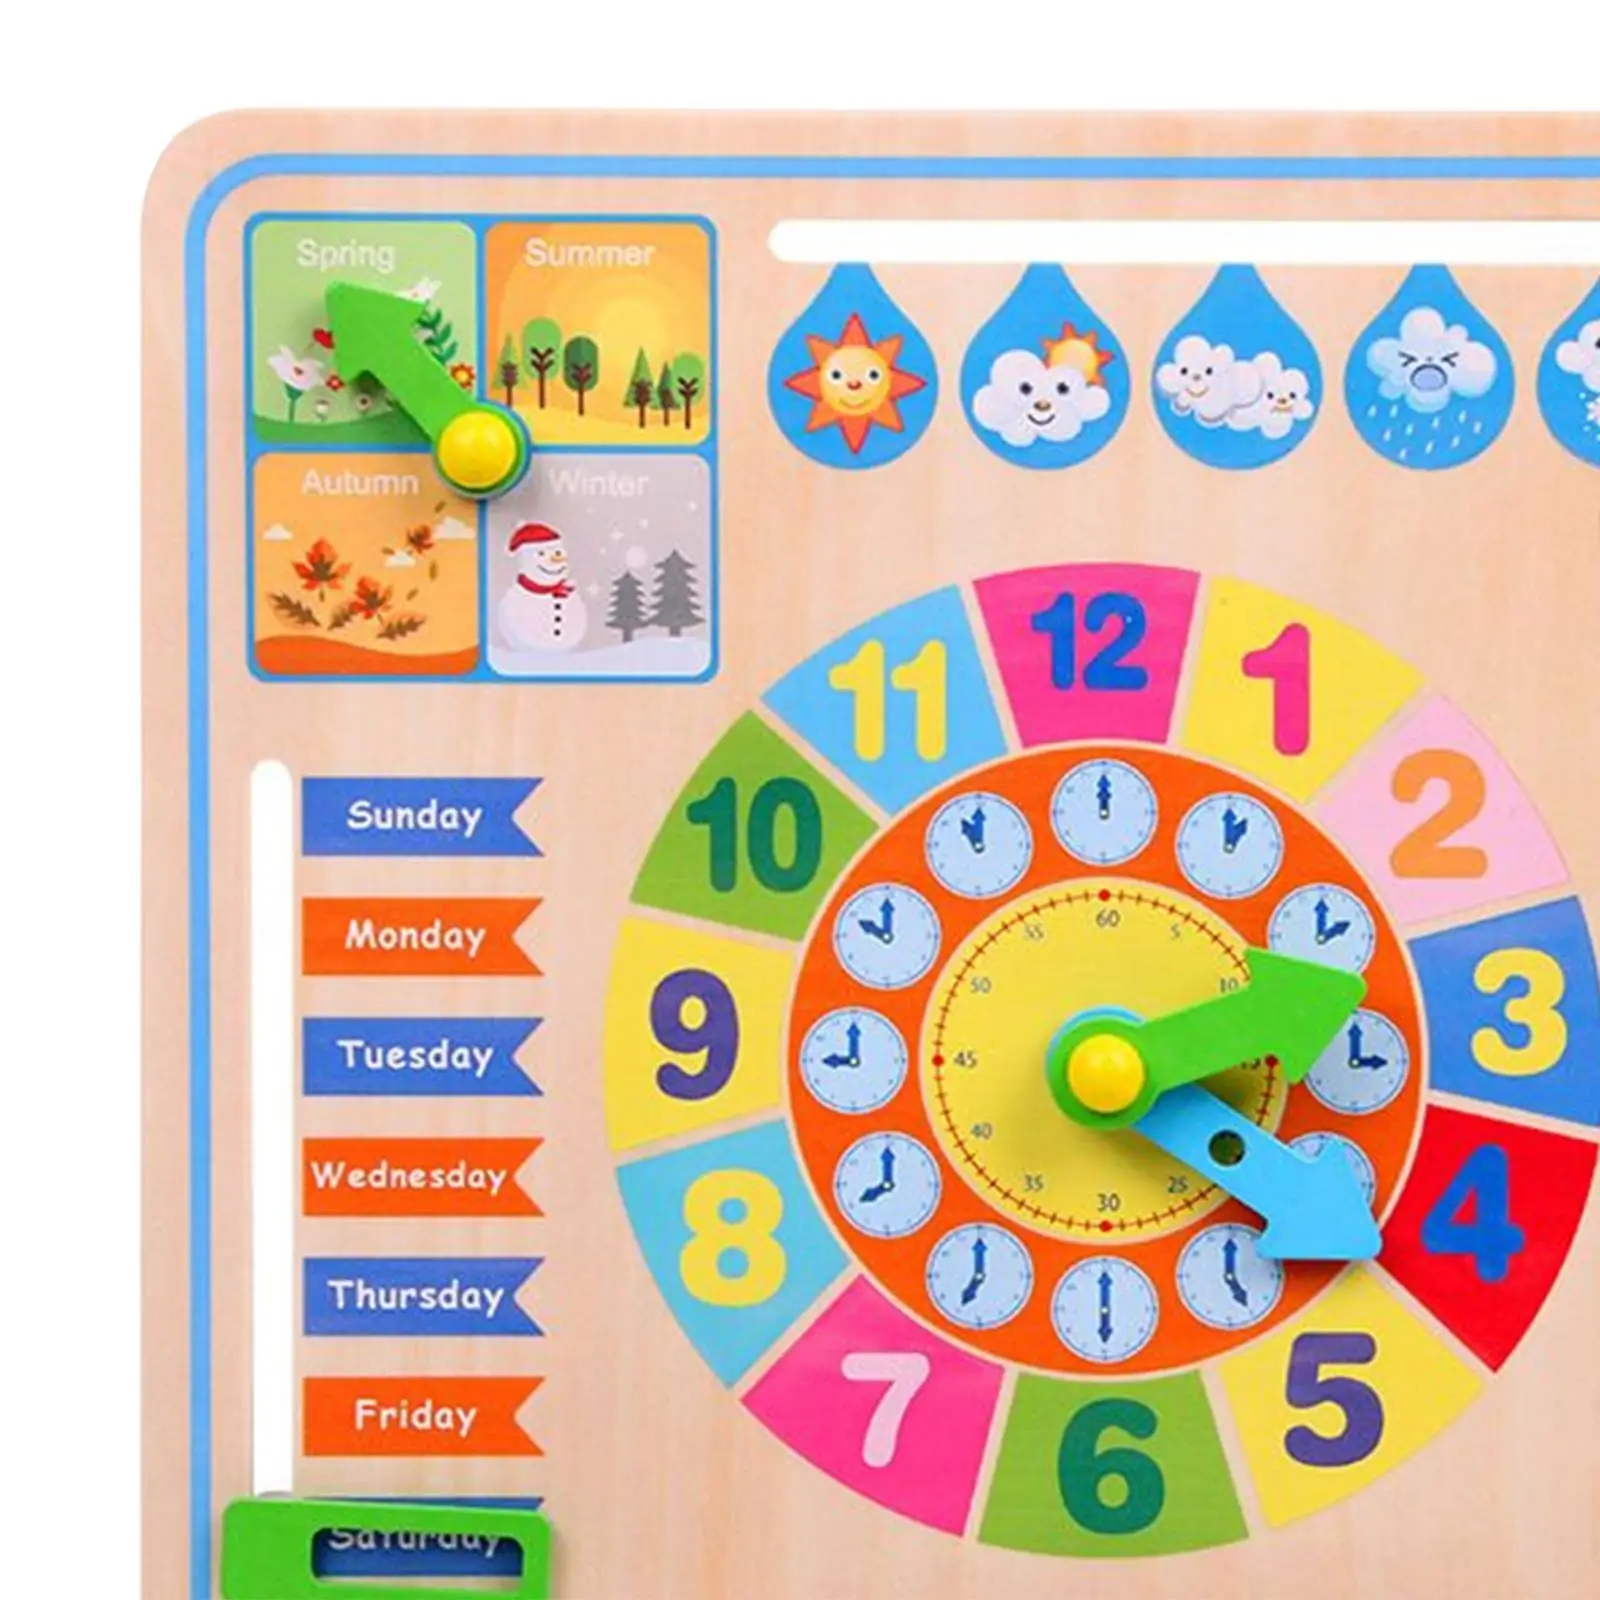 Montessori Educational Wooden Preschool Telling Time Teaching Clock Time Calendar Clock for Toddlers Boys and Girls Kids